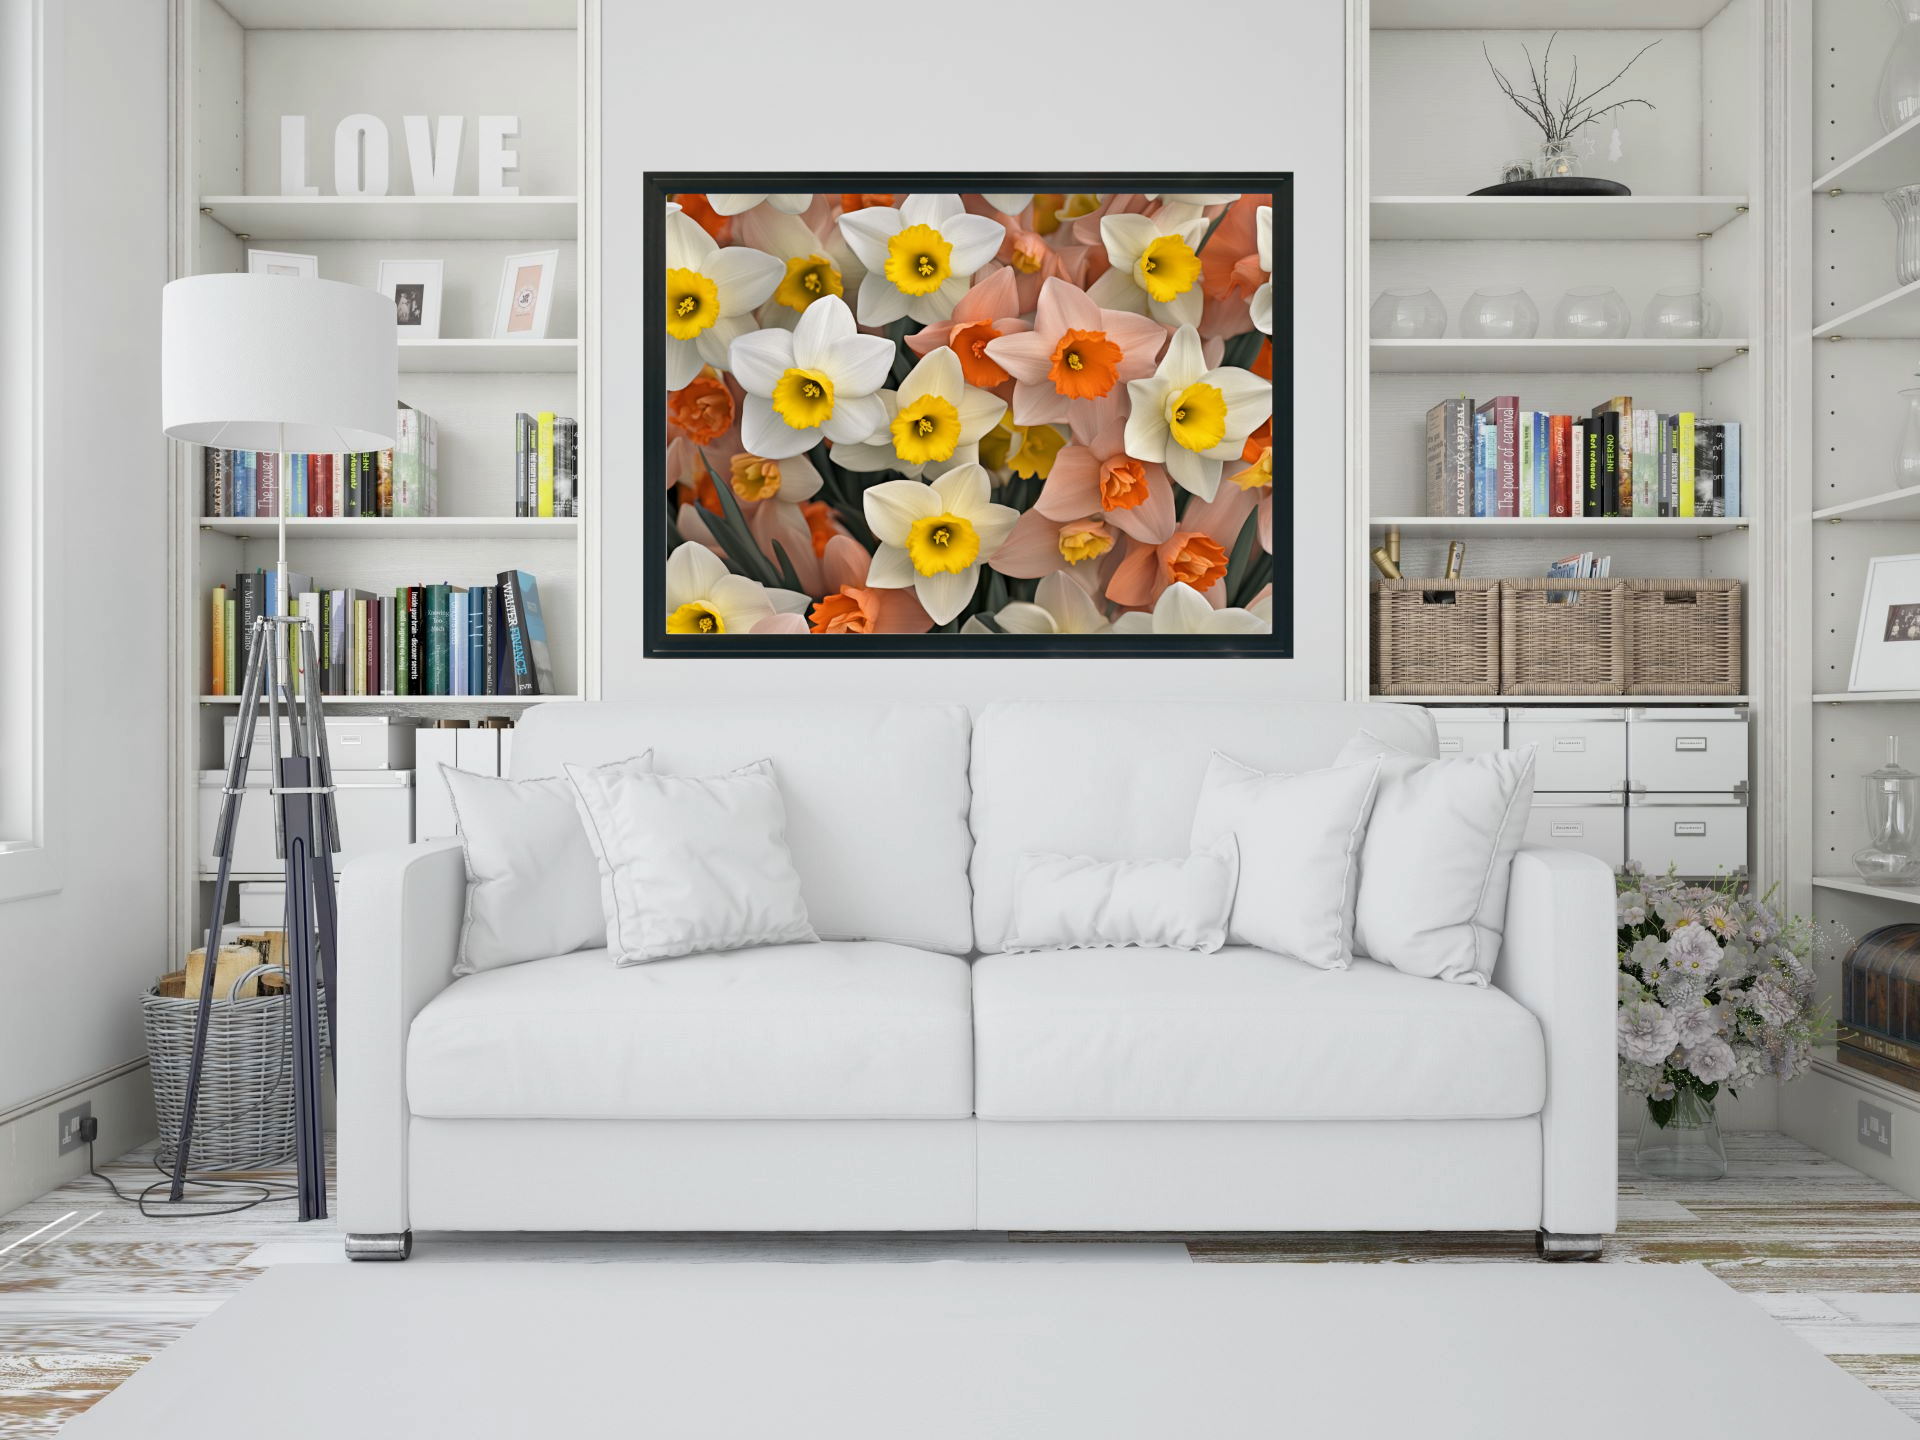 Wall Art DAFFODILS Canvas Print Art Deco Painting Original Giclee + Frame Love Flower Minimalist Beauty Fun Design Fit House Office Gift Ready Hang